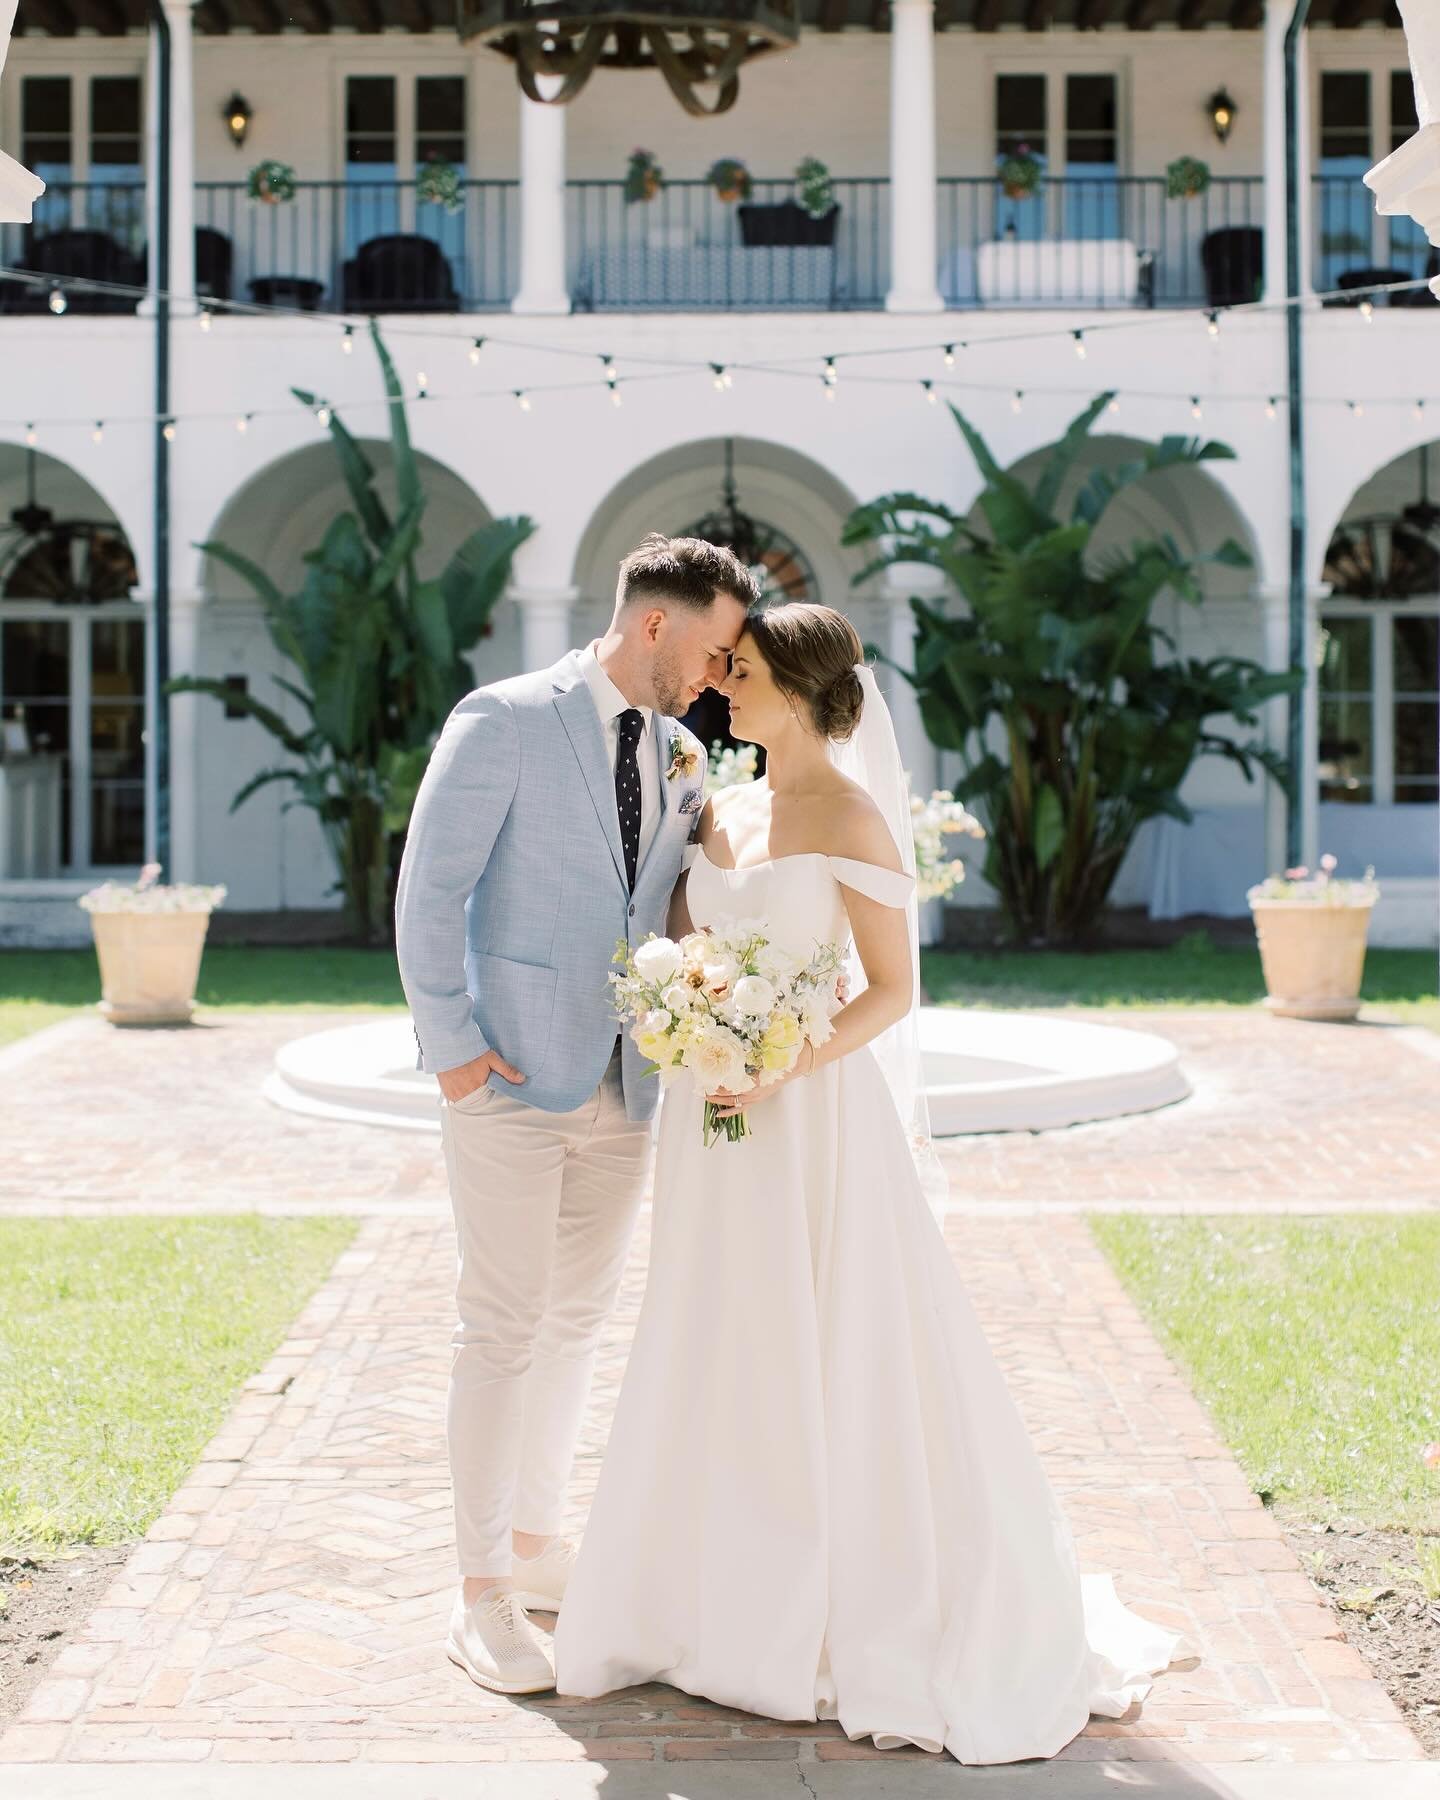 Mr. + Mrs. Dutson 🌸 4.6.24 // Jade + Jonn got married at the beautiful Crane Cottage in @jekyll_island at @jekyllclub with their family, friends, and adorable daughter Eloise in attendance. I had a very hard time choosing sneak peeks to share! 
.
.
